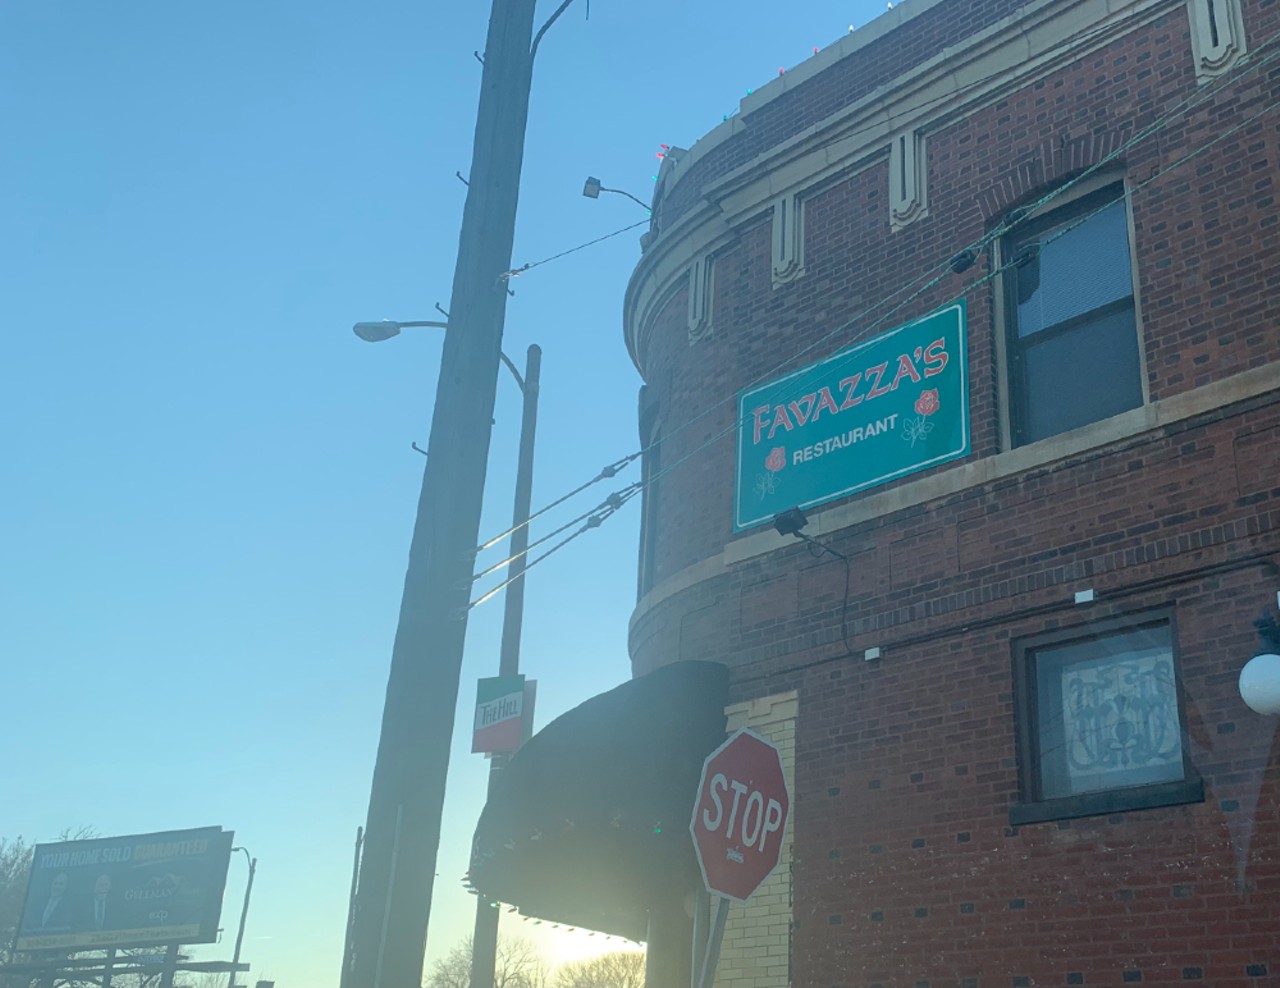 Favazza&#146;s
(5201 Southwest Avenue, 314-772-4454)
&#147;First time at Favazza's the other night. Great way to end the day after a day date with my wife.&#148; - Joseph G.
Photo credit: Jenna Jones